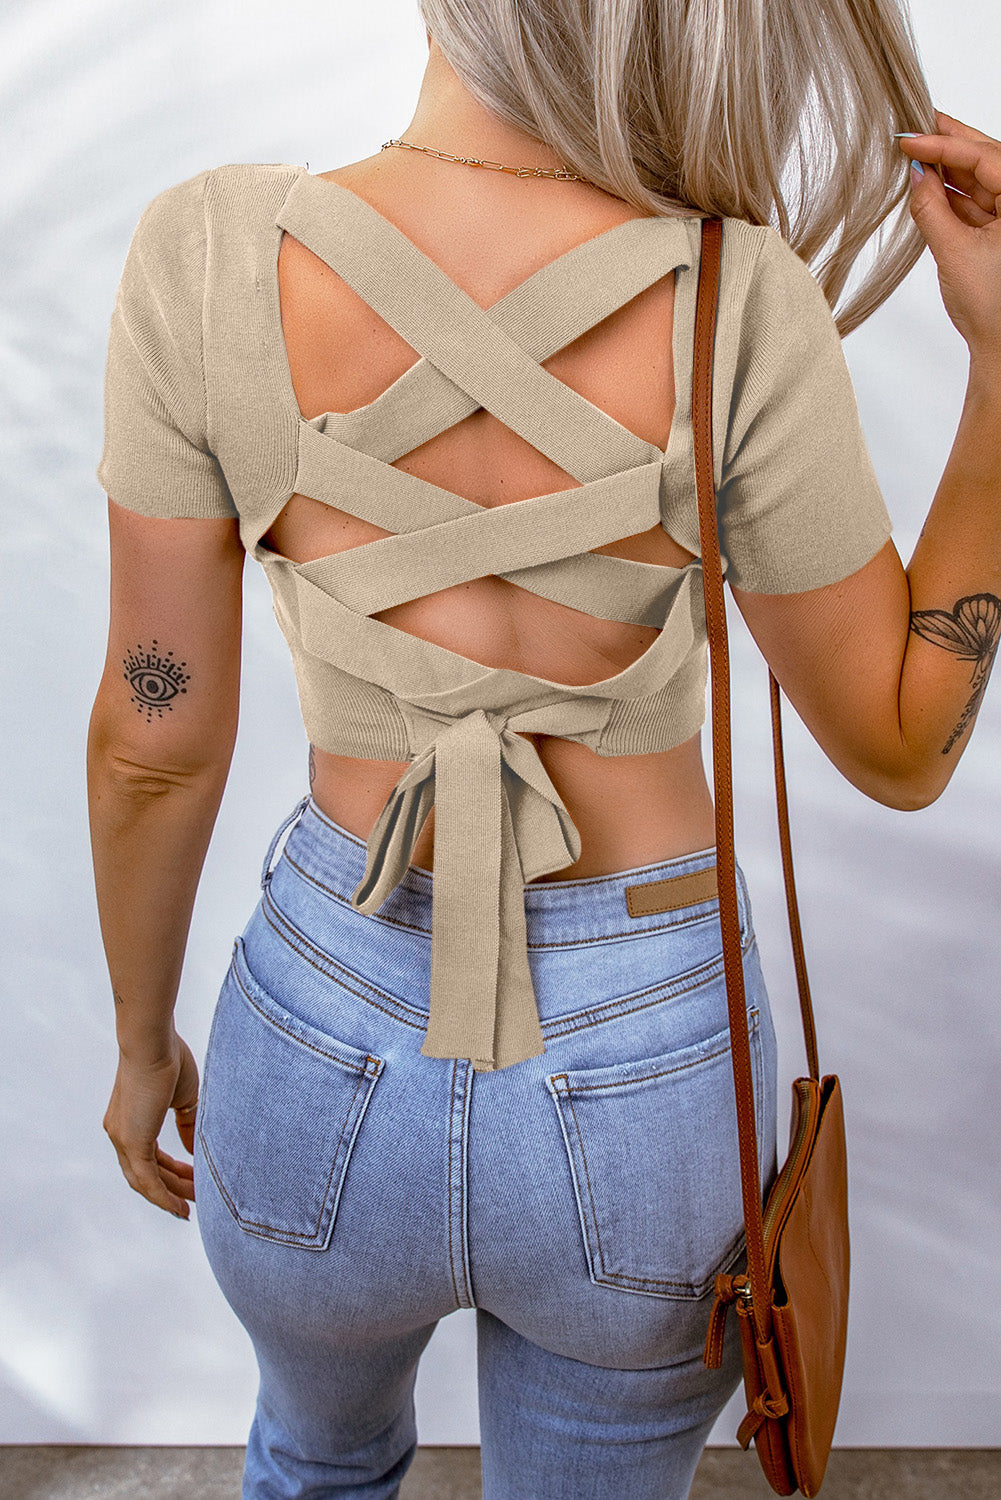 Lace-Up Square Neck Crop Top - Women’s Clothing & Accessories - Shirts & Tops - 12 - 2024